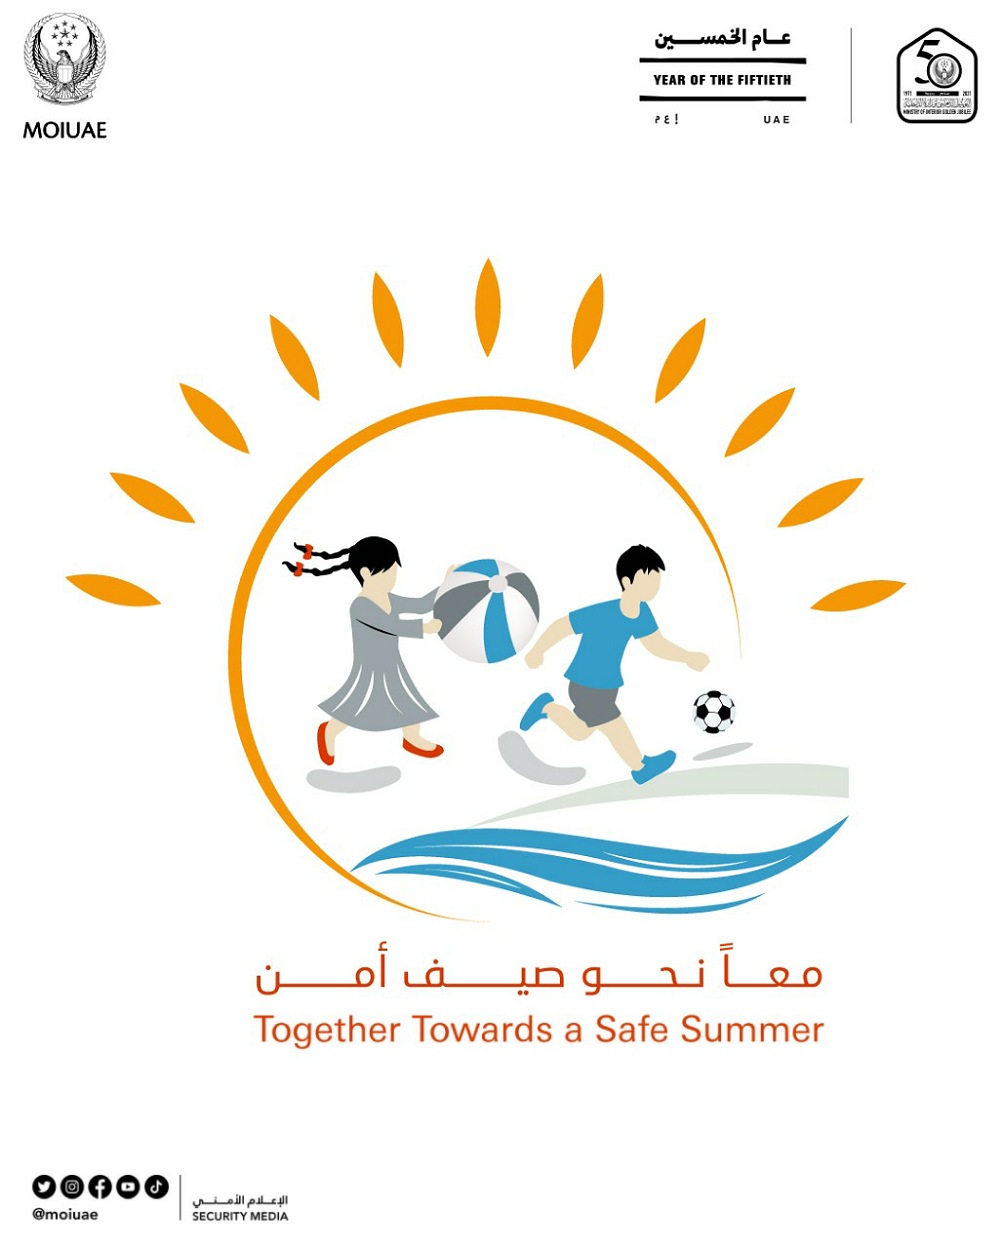 Together Towards a Safe Summer" initiative enhances ways to protect children by making the best use of leisure time